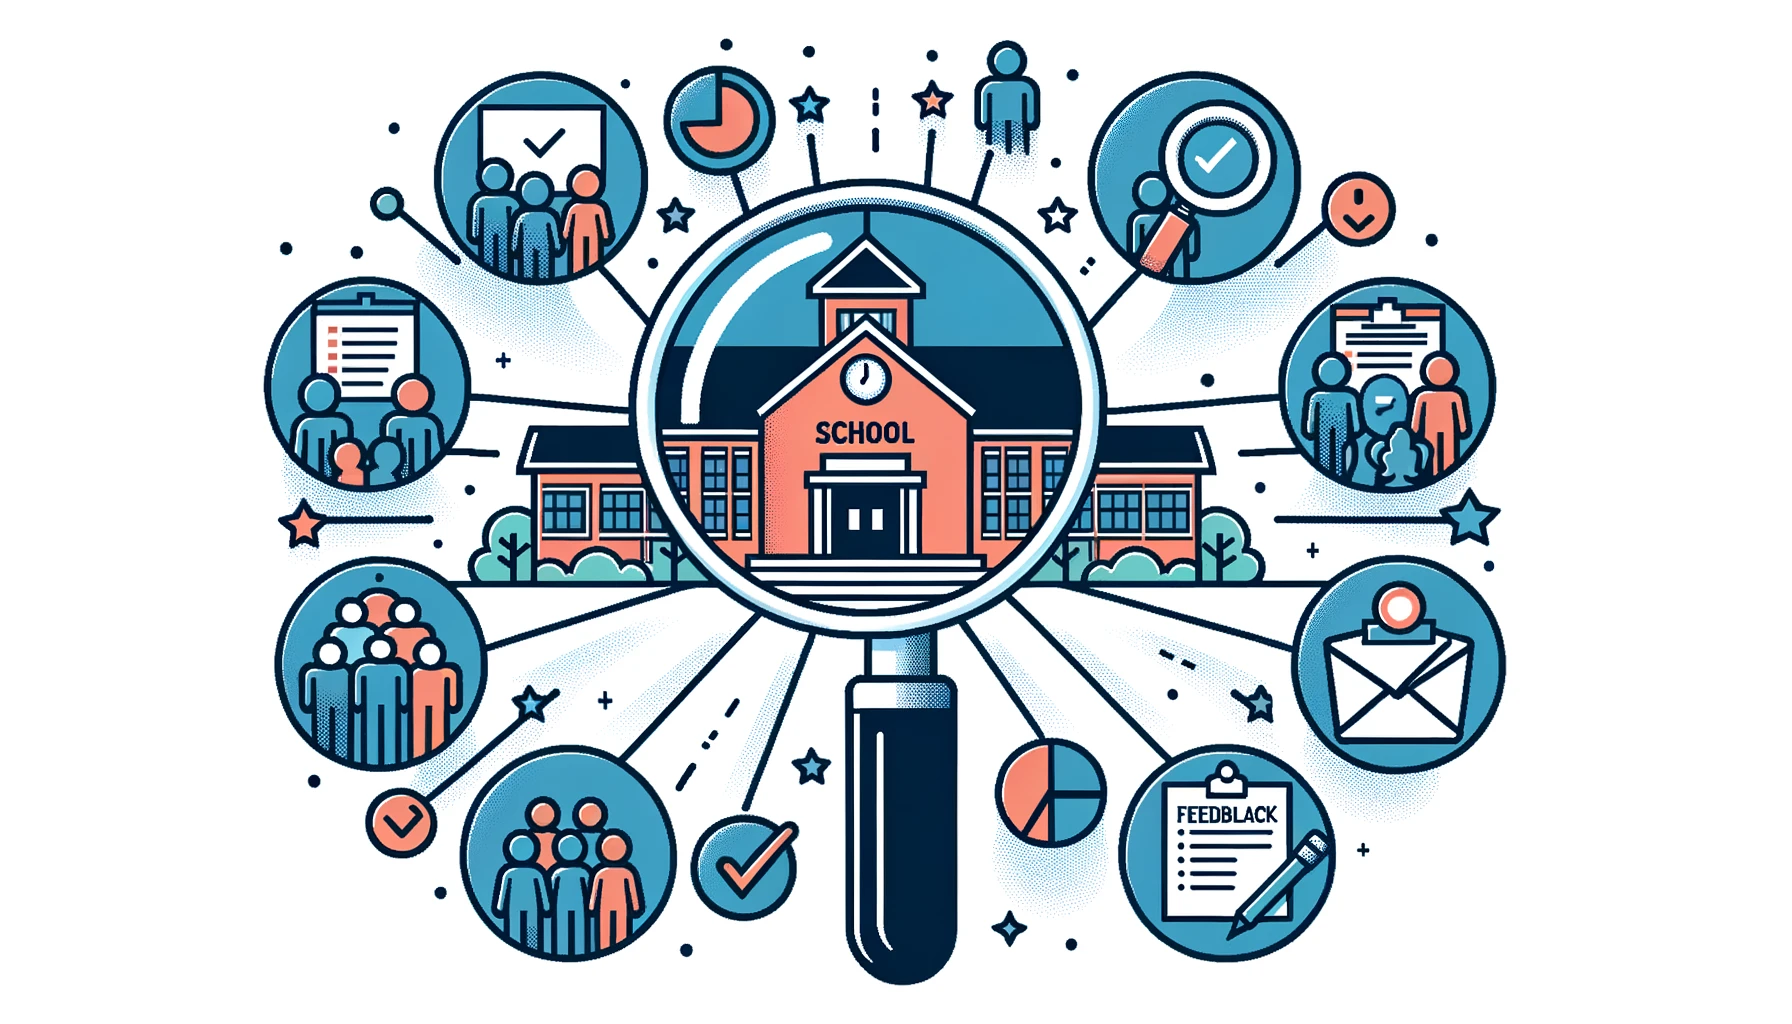 Vector image of a school building at the center, with radiating lines connecting to various icons: a family attending an event, community members in a meeting, a feedback box, and a volunteer sign-up sheet. Above the school, there's a magnifying glass focusing on these icons, symbolizing the school's data monitoring of its community engagement efforts.